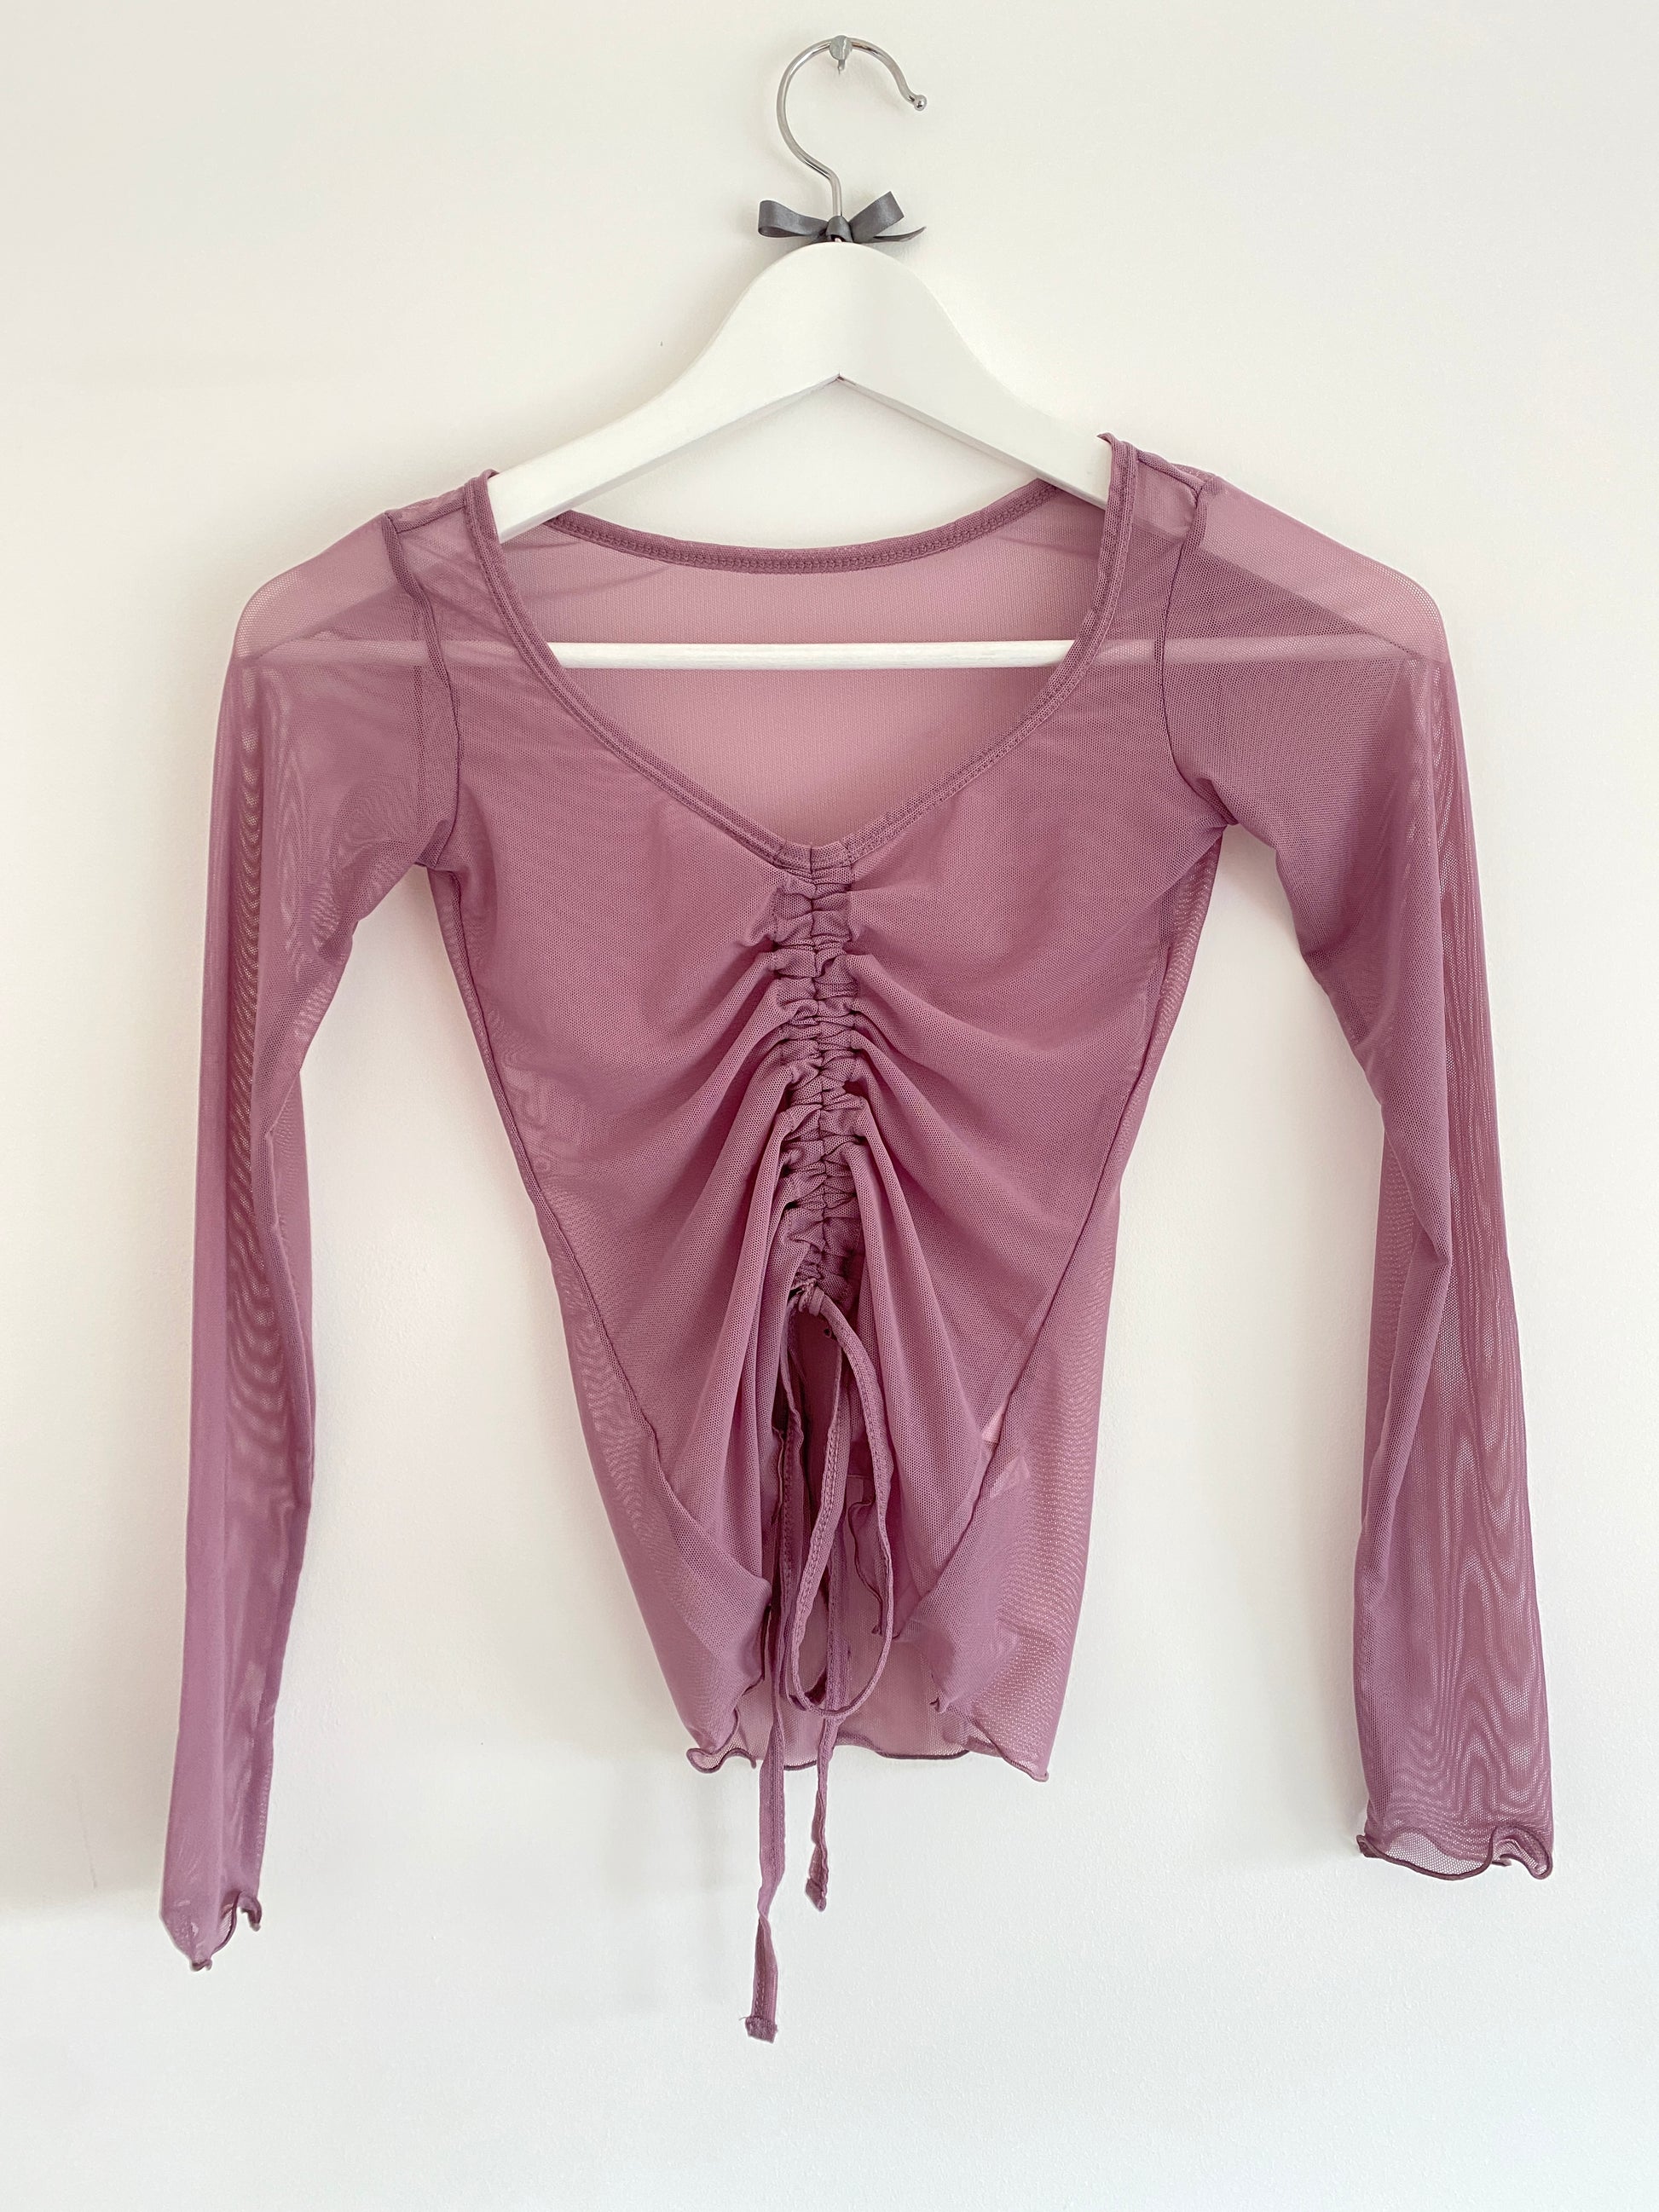 Lyrical long sleeve Gathered mesh top for warm up class from The Collective Dancewear